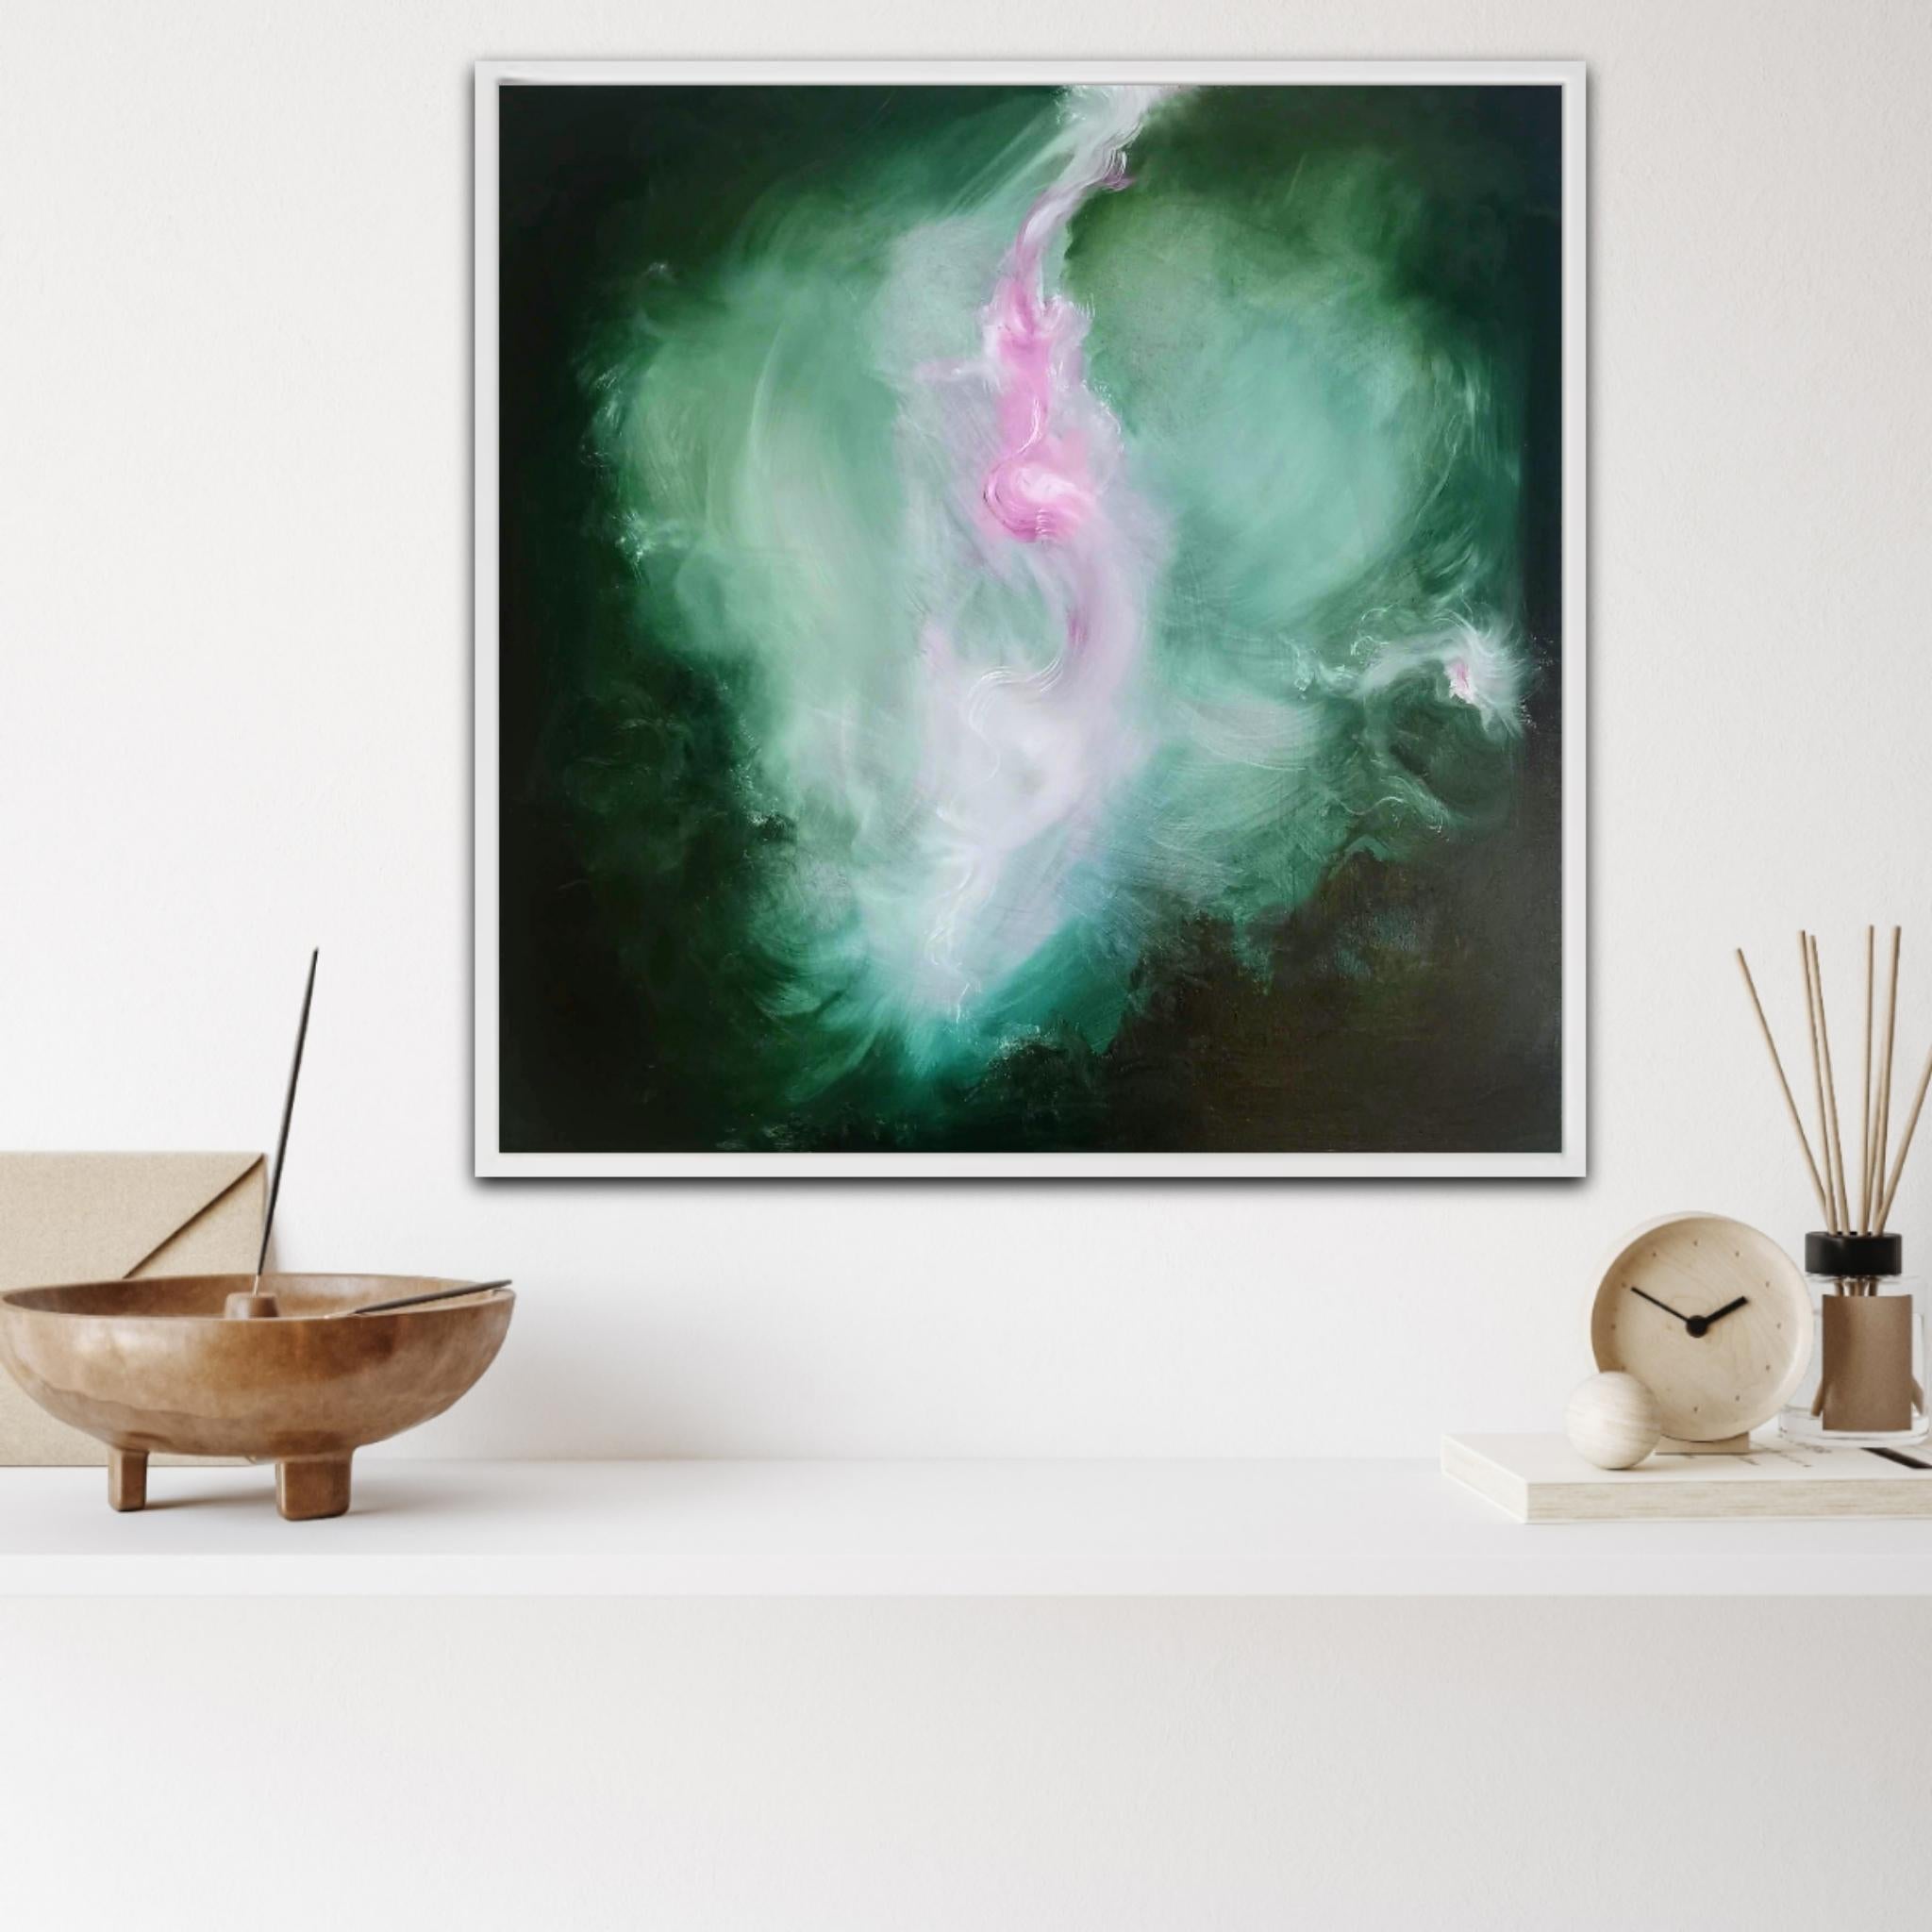 The Believer - Abstract floral painting in green and pink - Black Abstract Painting by Jennifer L. Baker